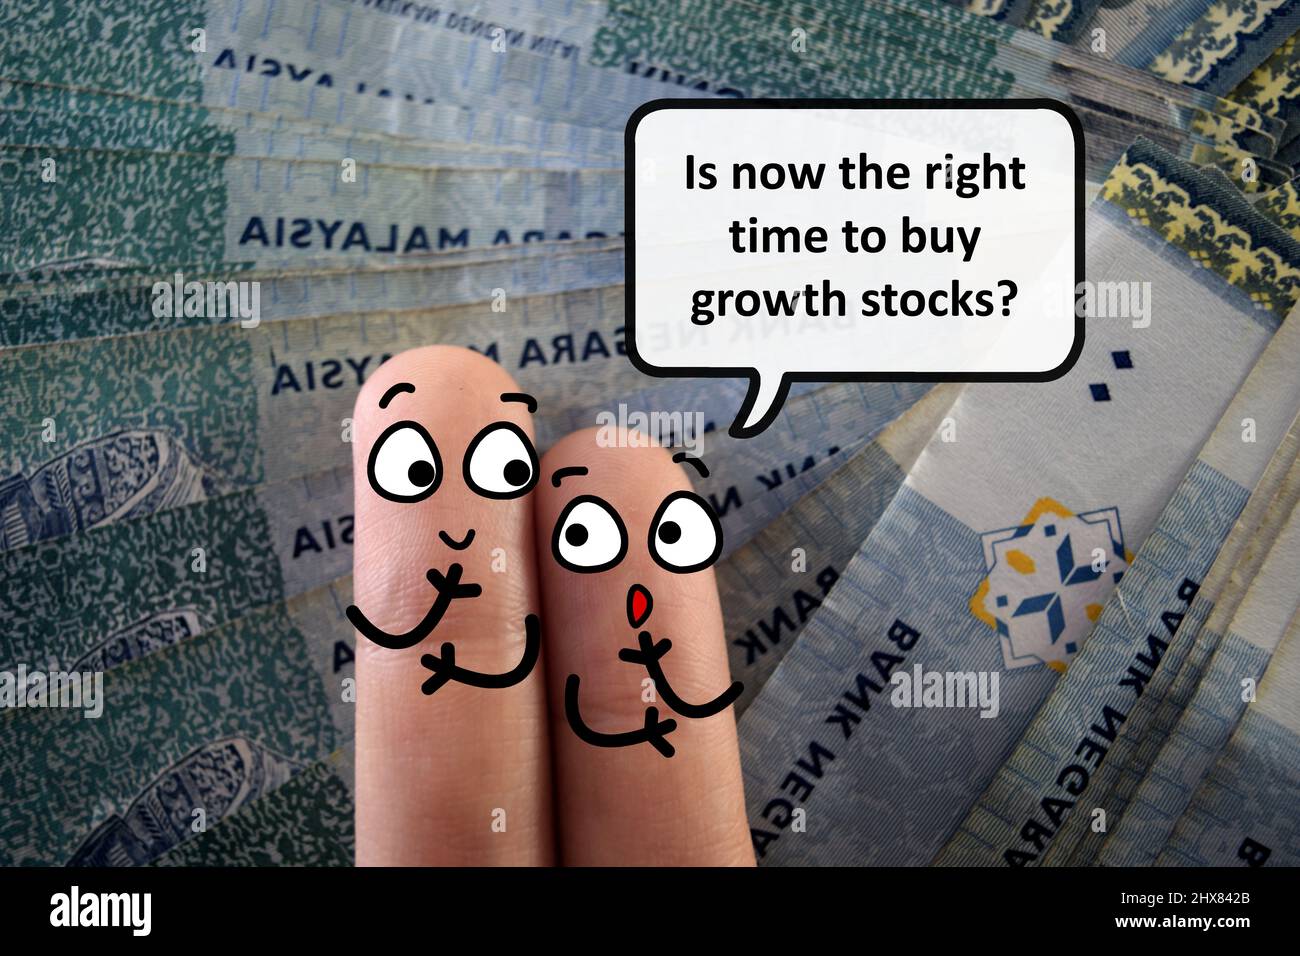 Two fingers are decorated as two person. They are discussing if it is the right time to buy growth stocks. Stock Photo